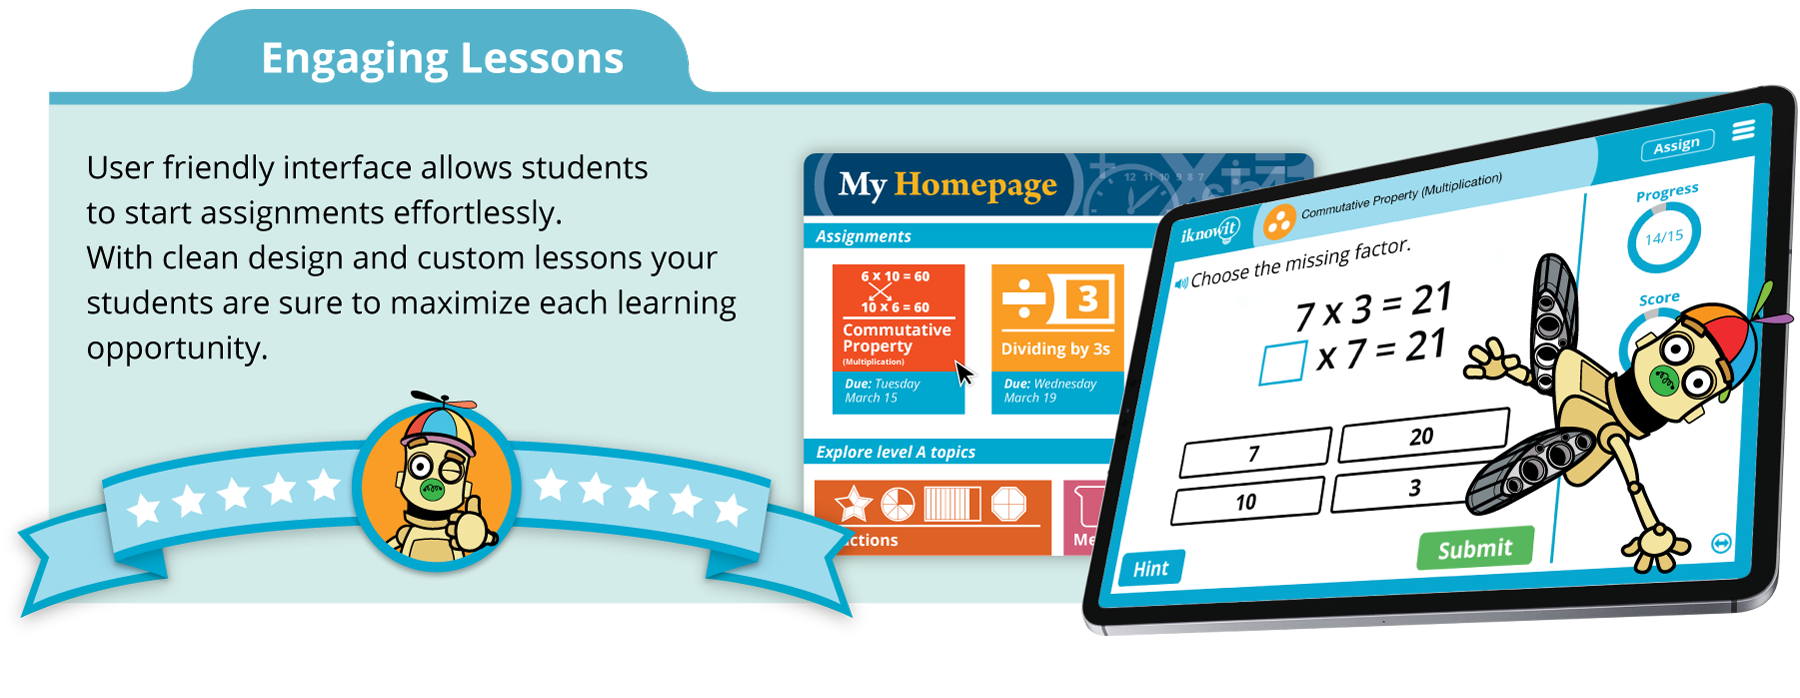 User friendly interface allows students to start assignments effortlessly.